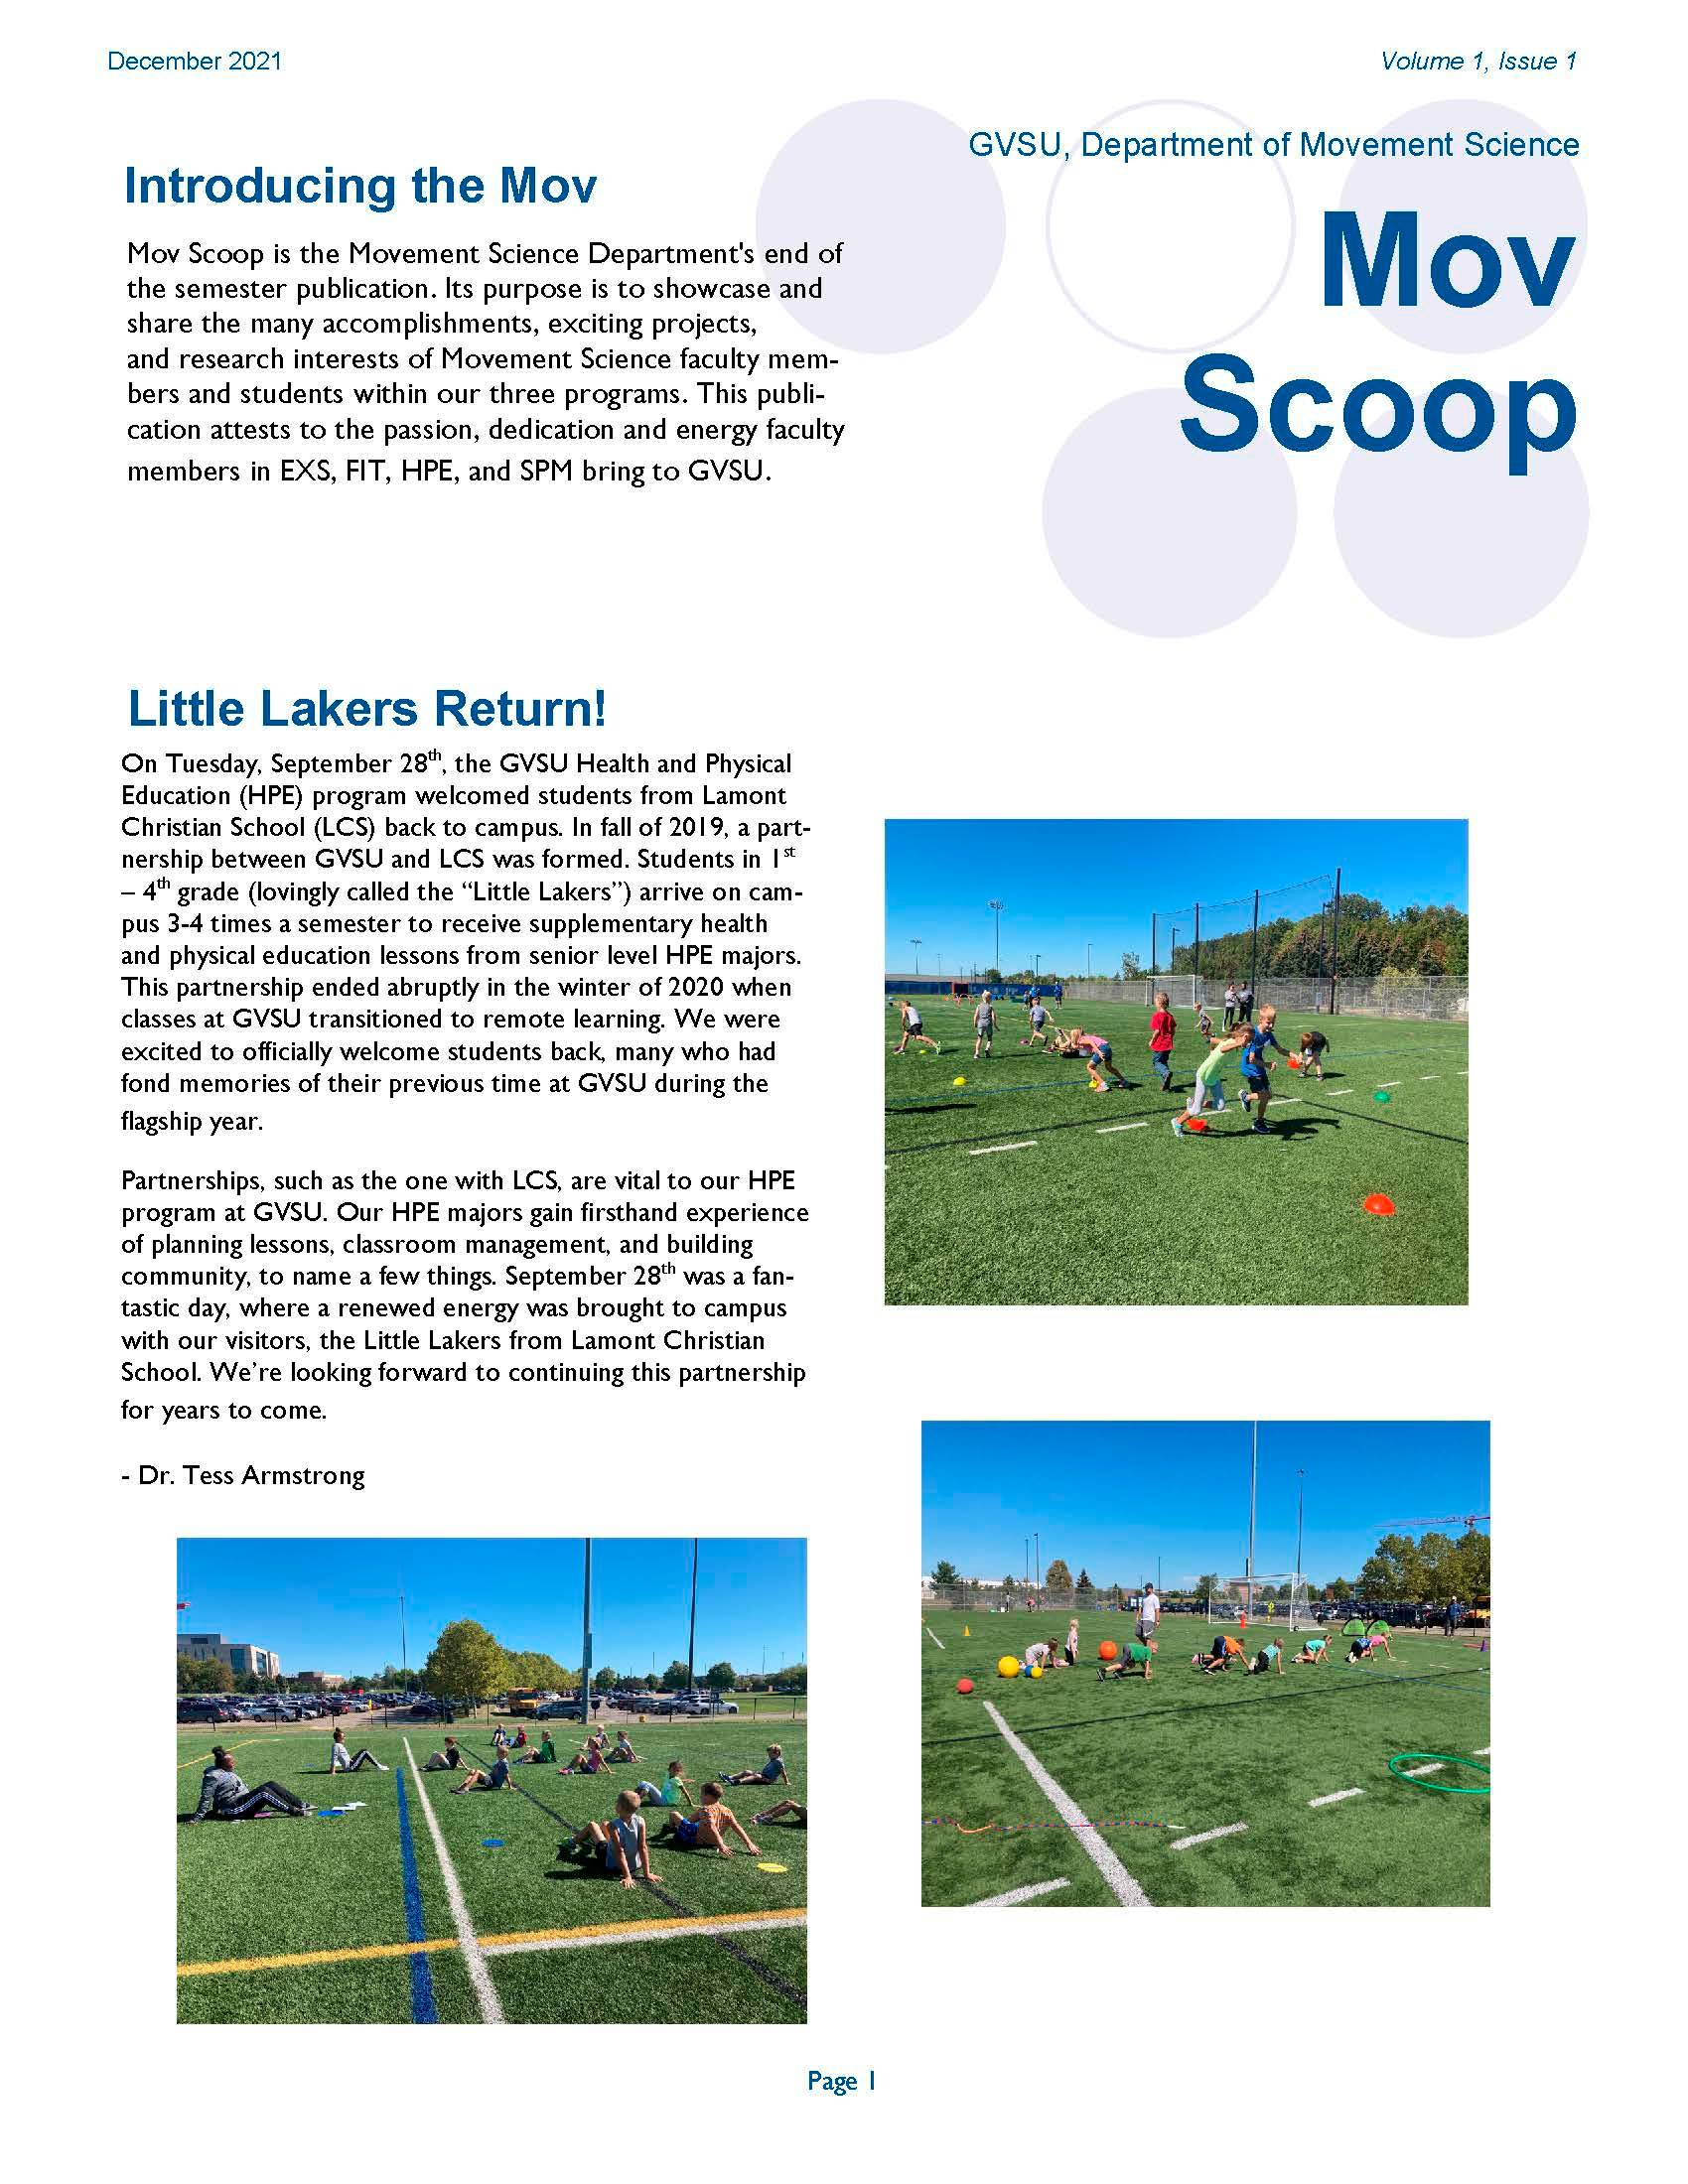 The Fall 2021 Mov Scoop Newsletter Cover